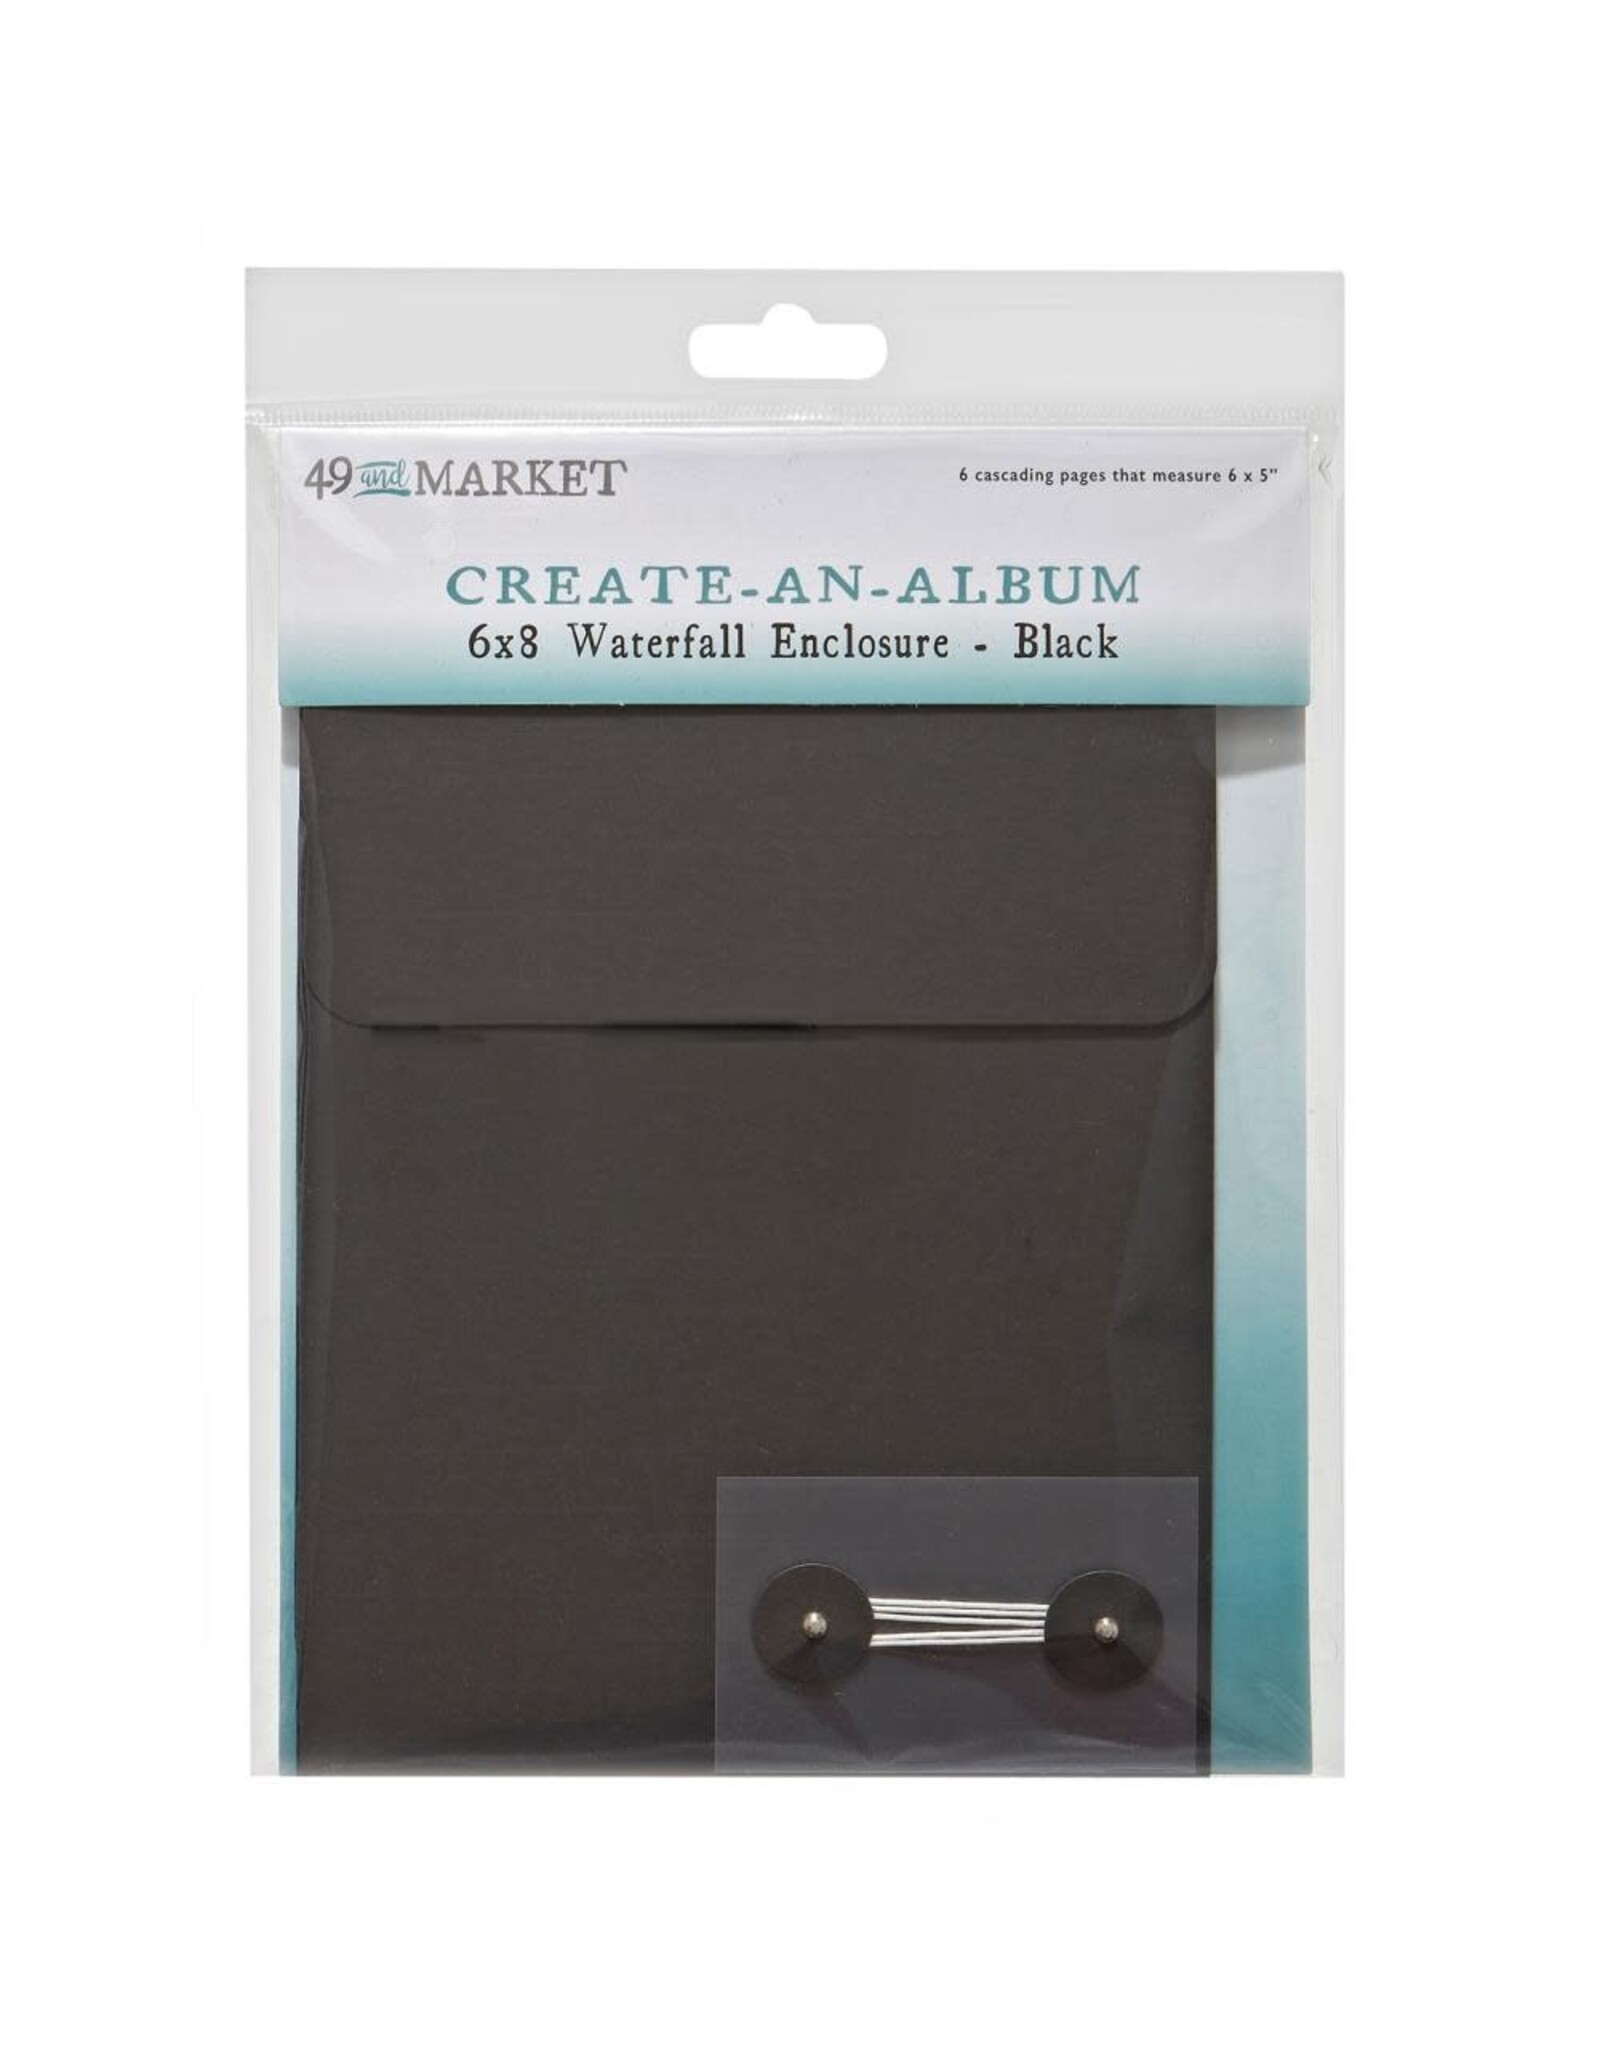 49 AND MARKET 49 AND MARKET CREATE-AN-ALBUM WATERFALL ENCLOSURE 6x8 BLACK